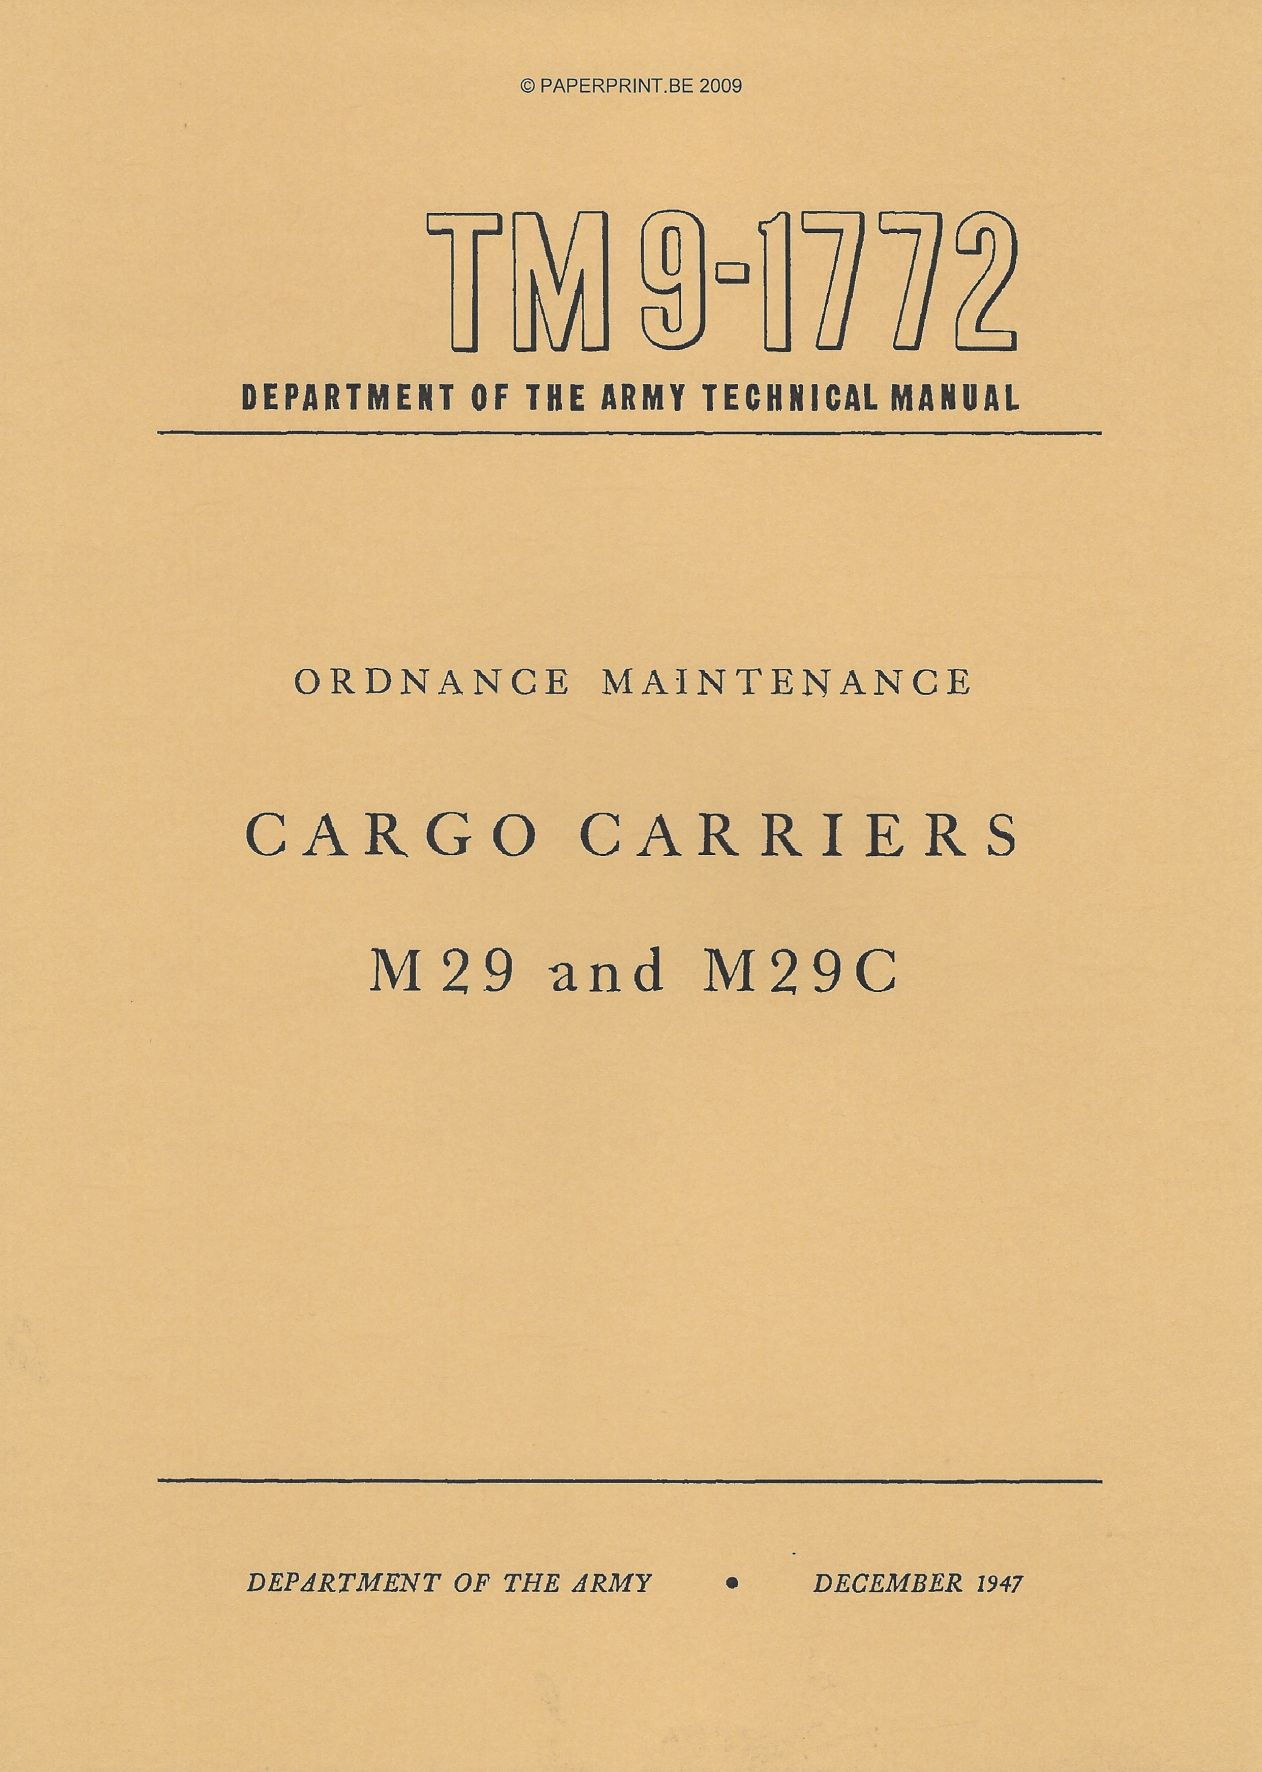 TM 9-1772 US CARGO CARRIERS M29 AND M29C